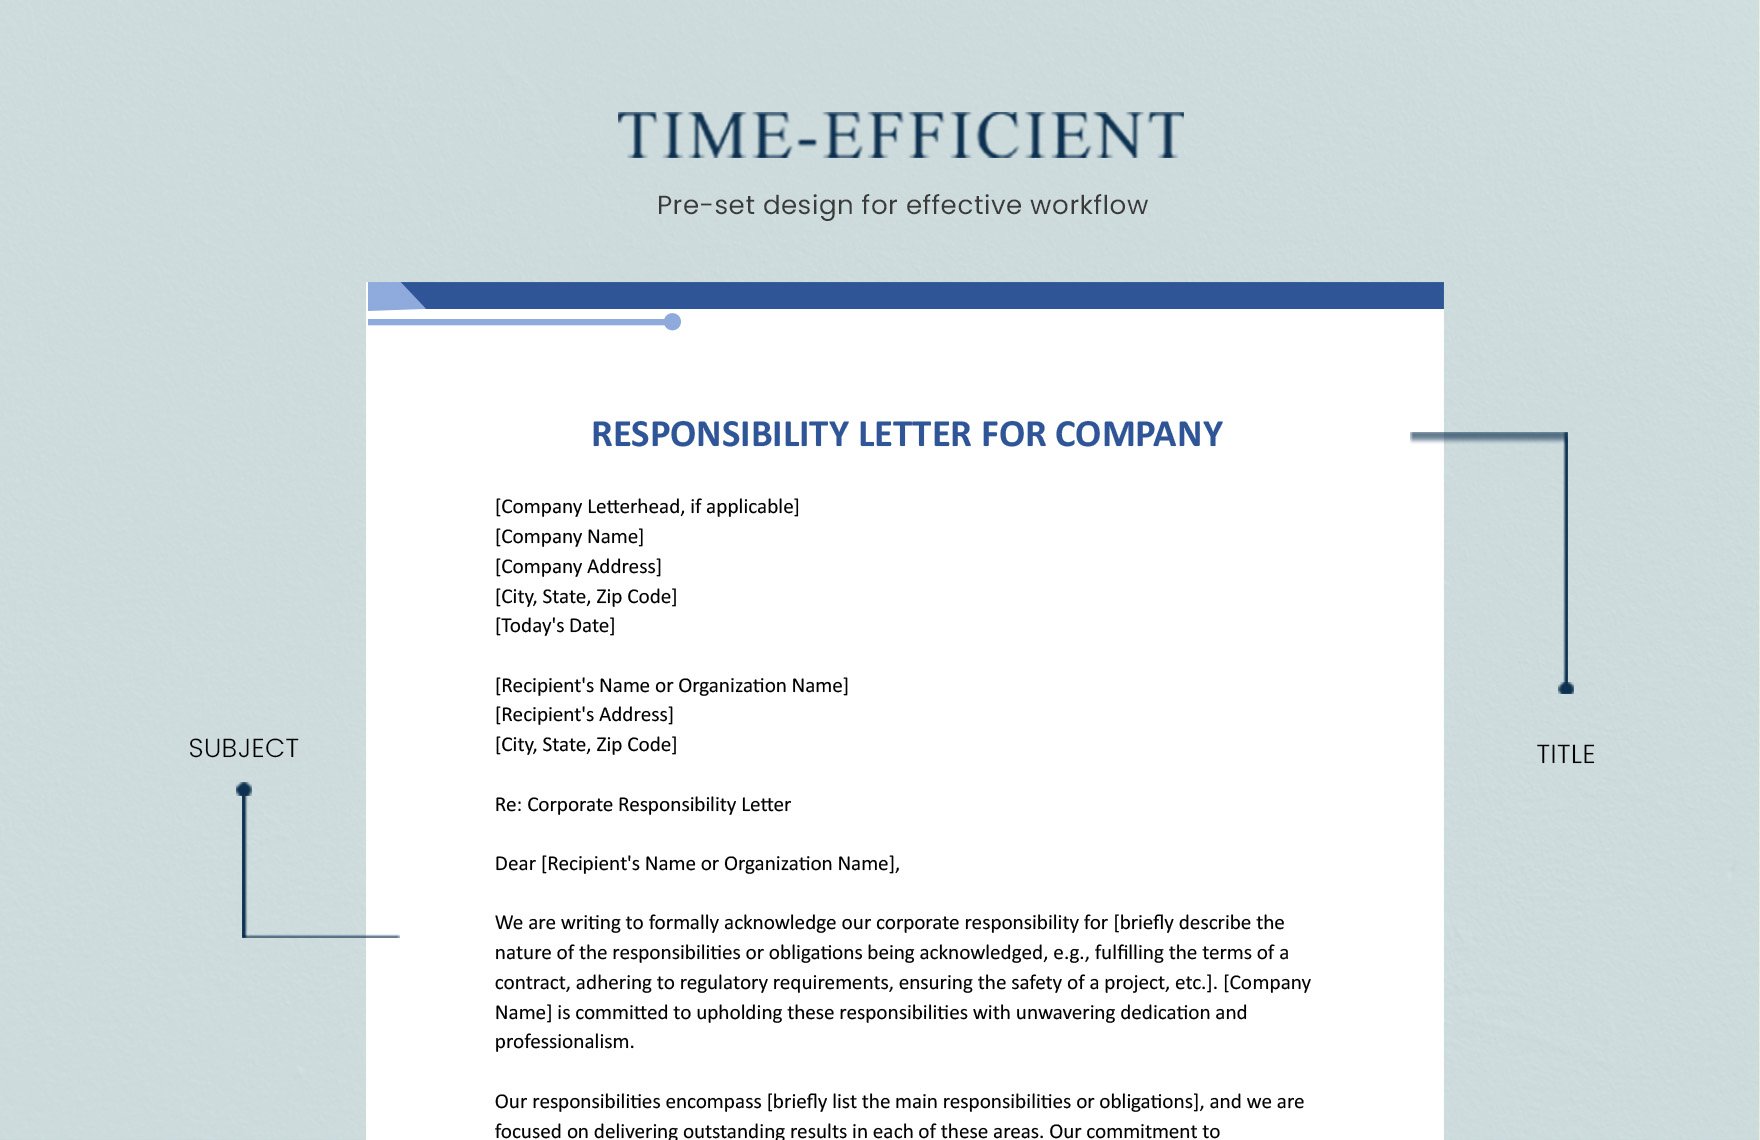 Responsibility Letter For Company